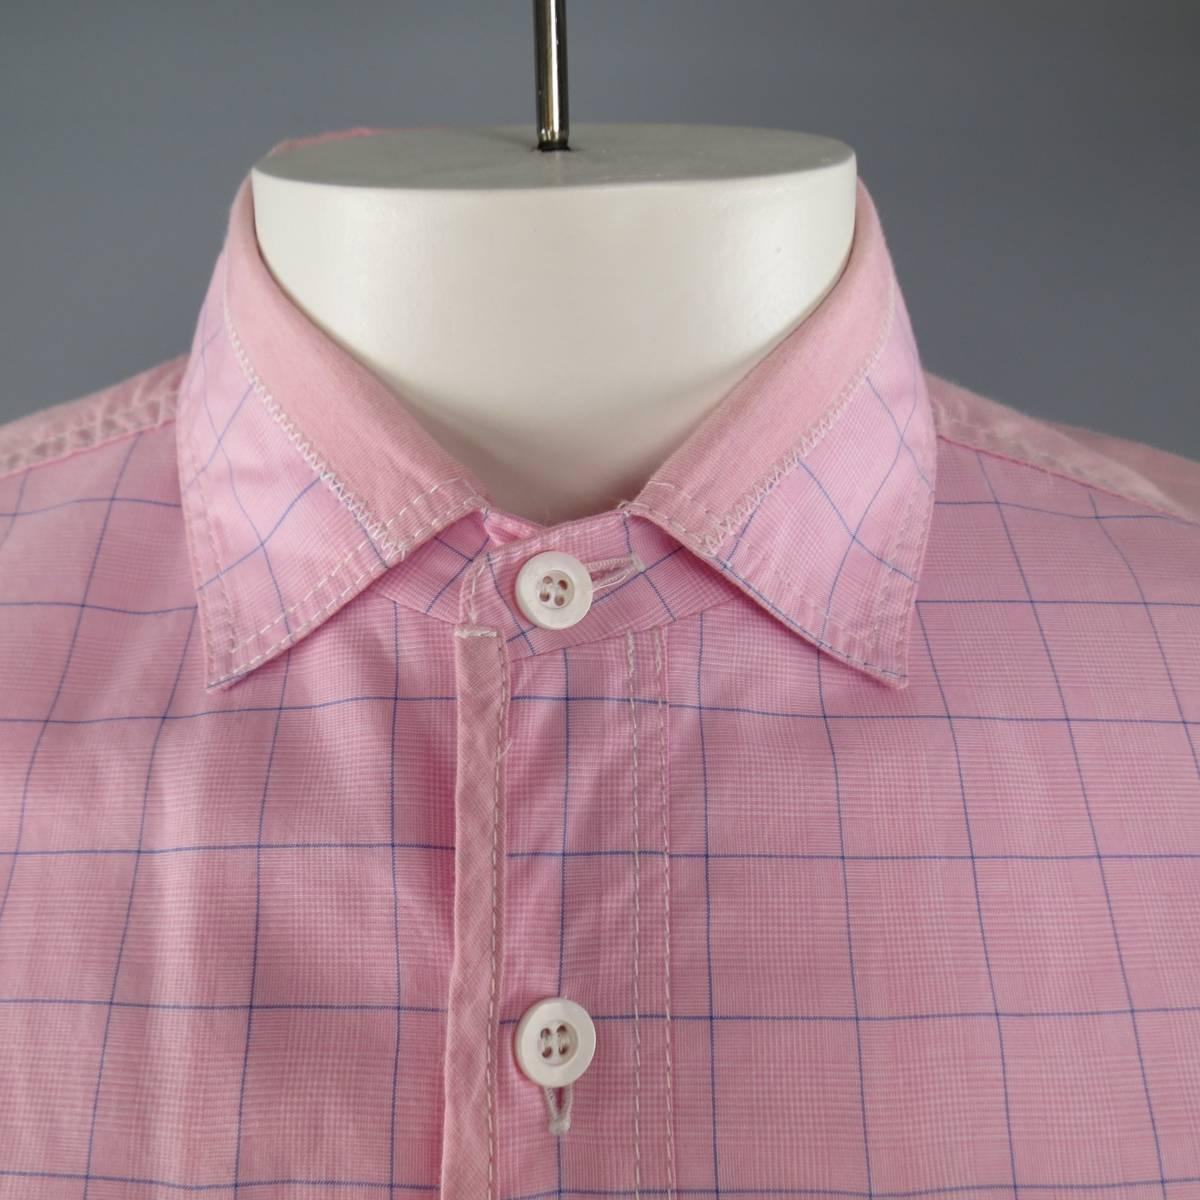 JUNYA WATANABE COmme Des Garcons MAN work inspired shirt in a pink and blue windowpane print cotton featuring a pointed collar, pink oxford fabric piping and back panel, green plaid side panels, and mini breast pocket. Minor stains. As-Is. Made in